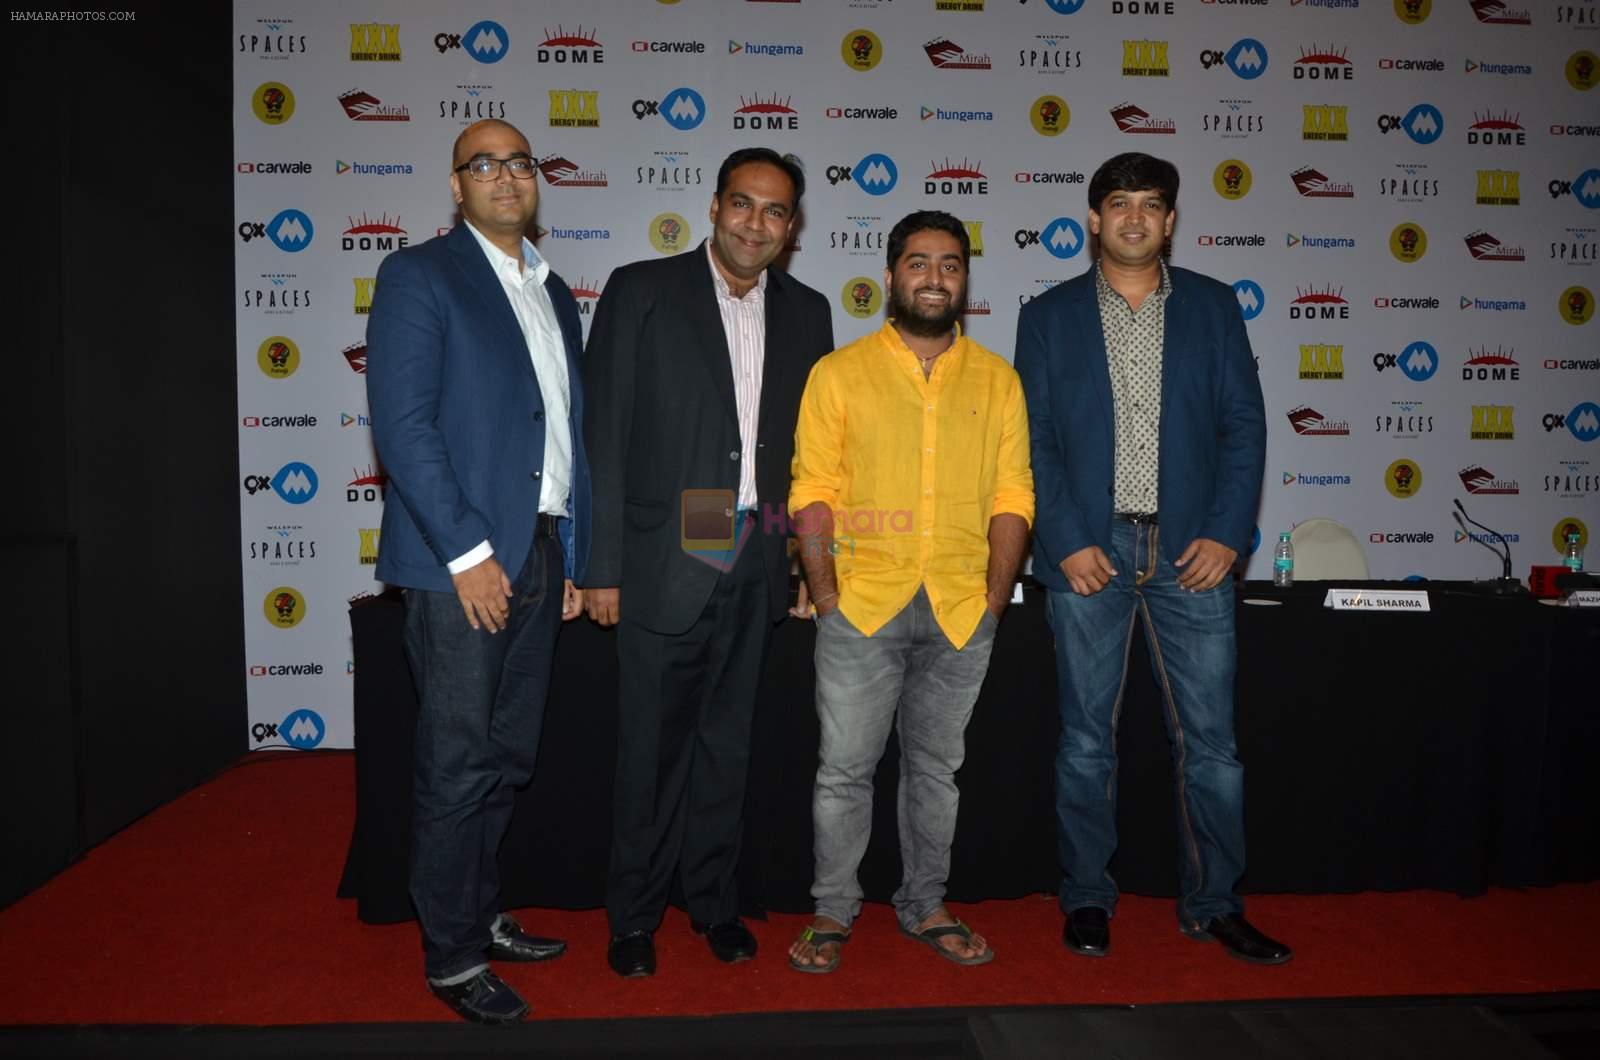 Arijit Singh at 9xm dome concert press meet in The Club on 1st July 2015